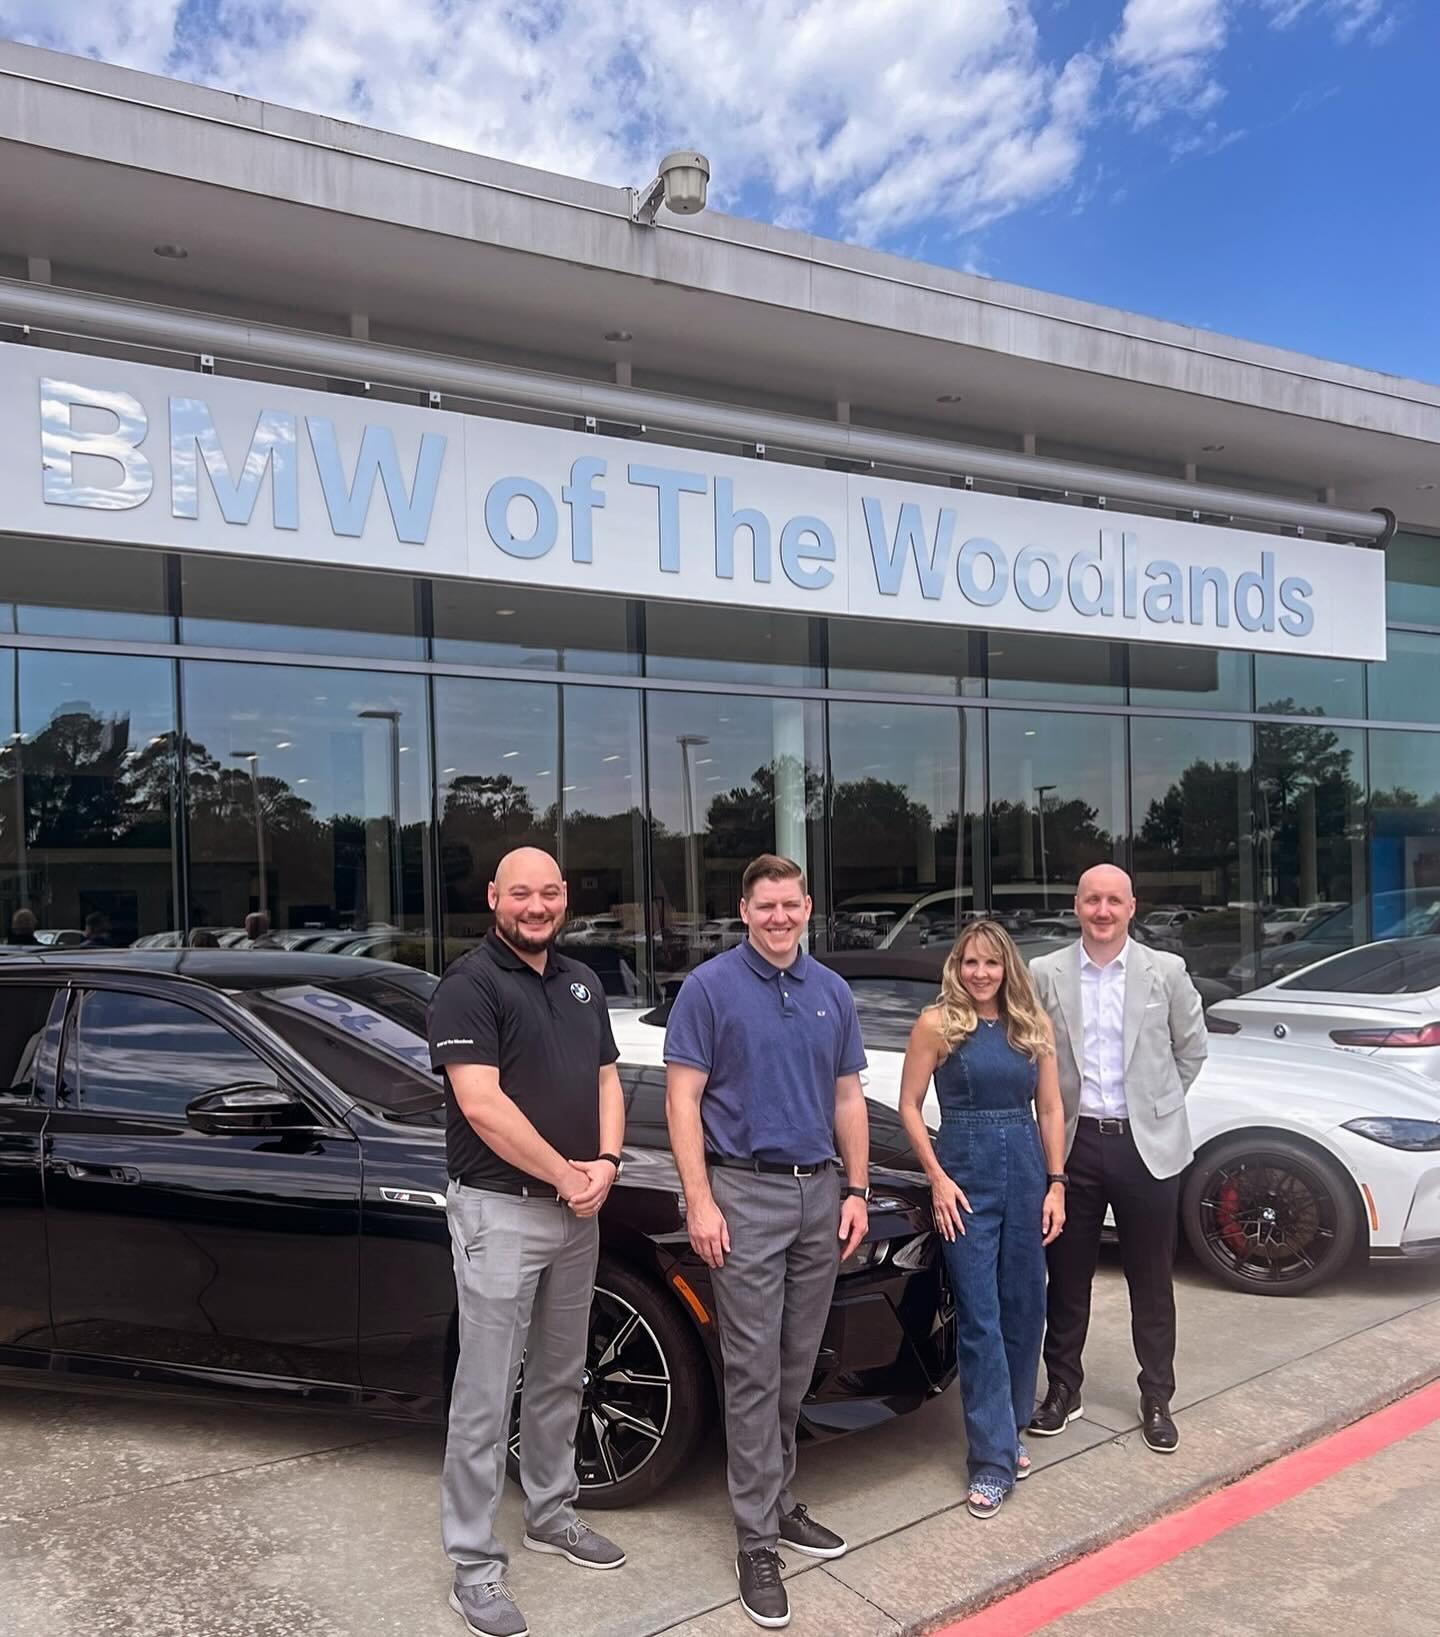 Thrilled to have the support of @bmwofthewoodlands again next season as a Gold Sponsor!! 

&bull;&bull;&bull;Now is the time to join us!  Registration is open til the end of May.  Come train with us over the summer for those fall races. 

&bull;&bull